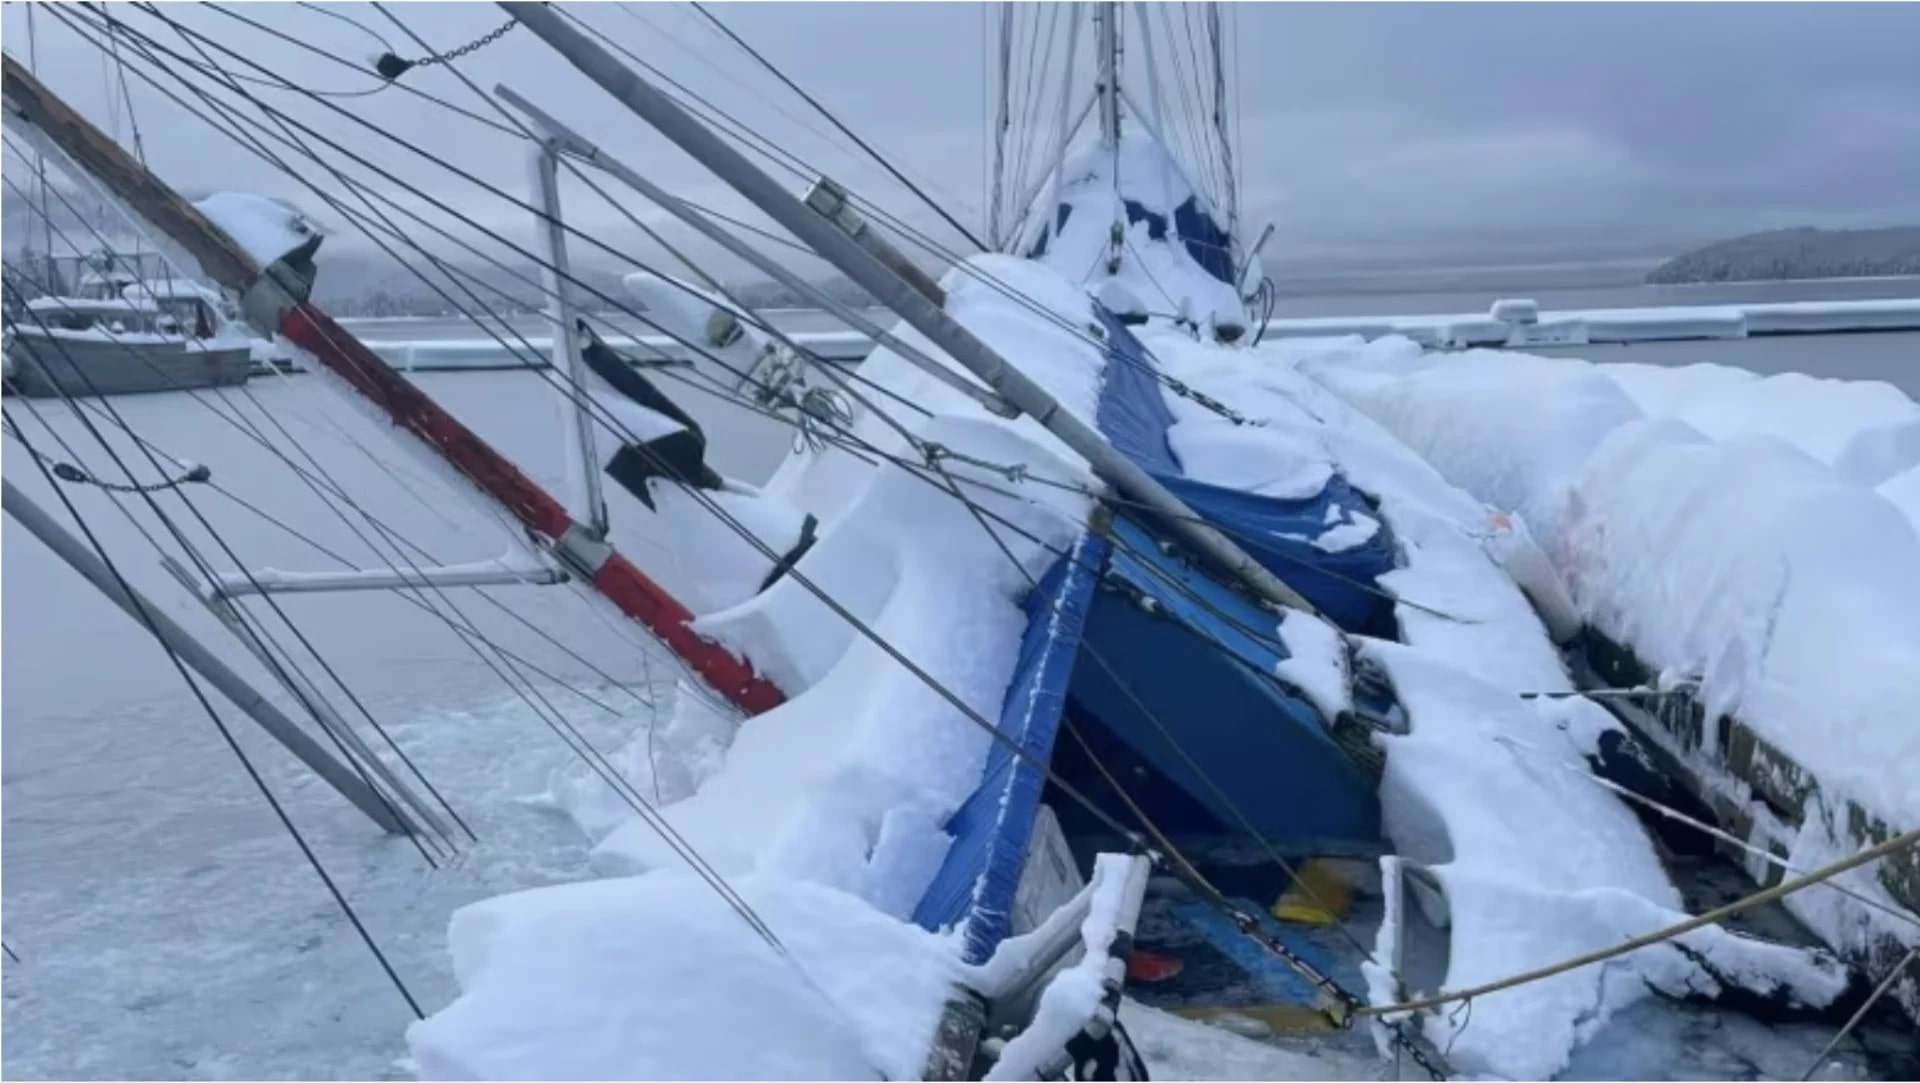 Heavy snowfall causes boat to sink